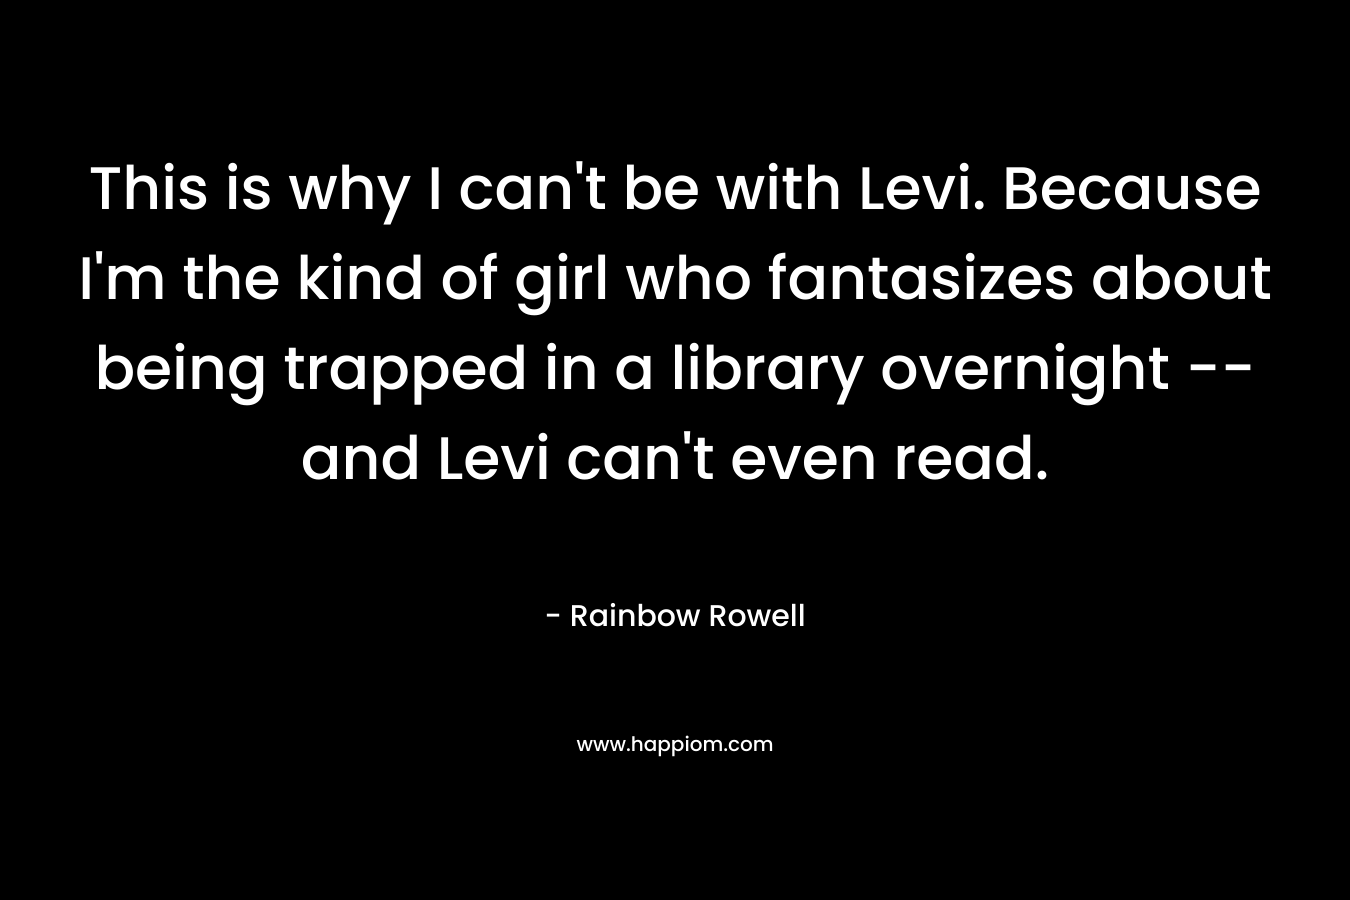 This is why I can't be with Levi. Because I'm the kind of girl who fantasizes about being trapped in a library overnight -- and Levi can't even read.